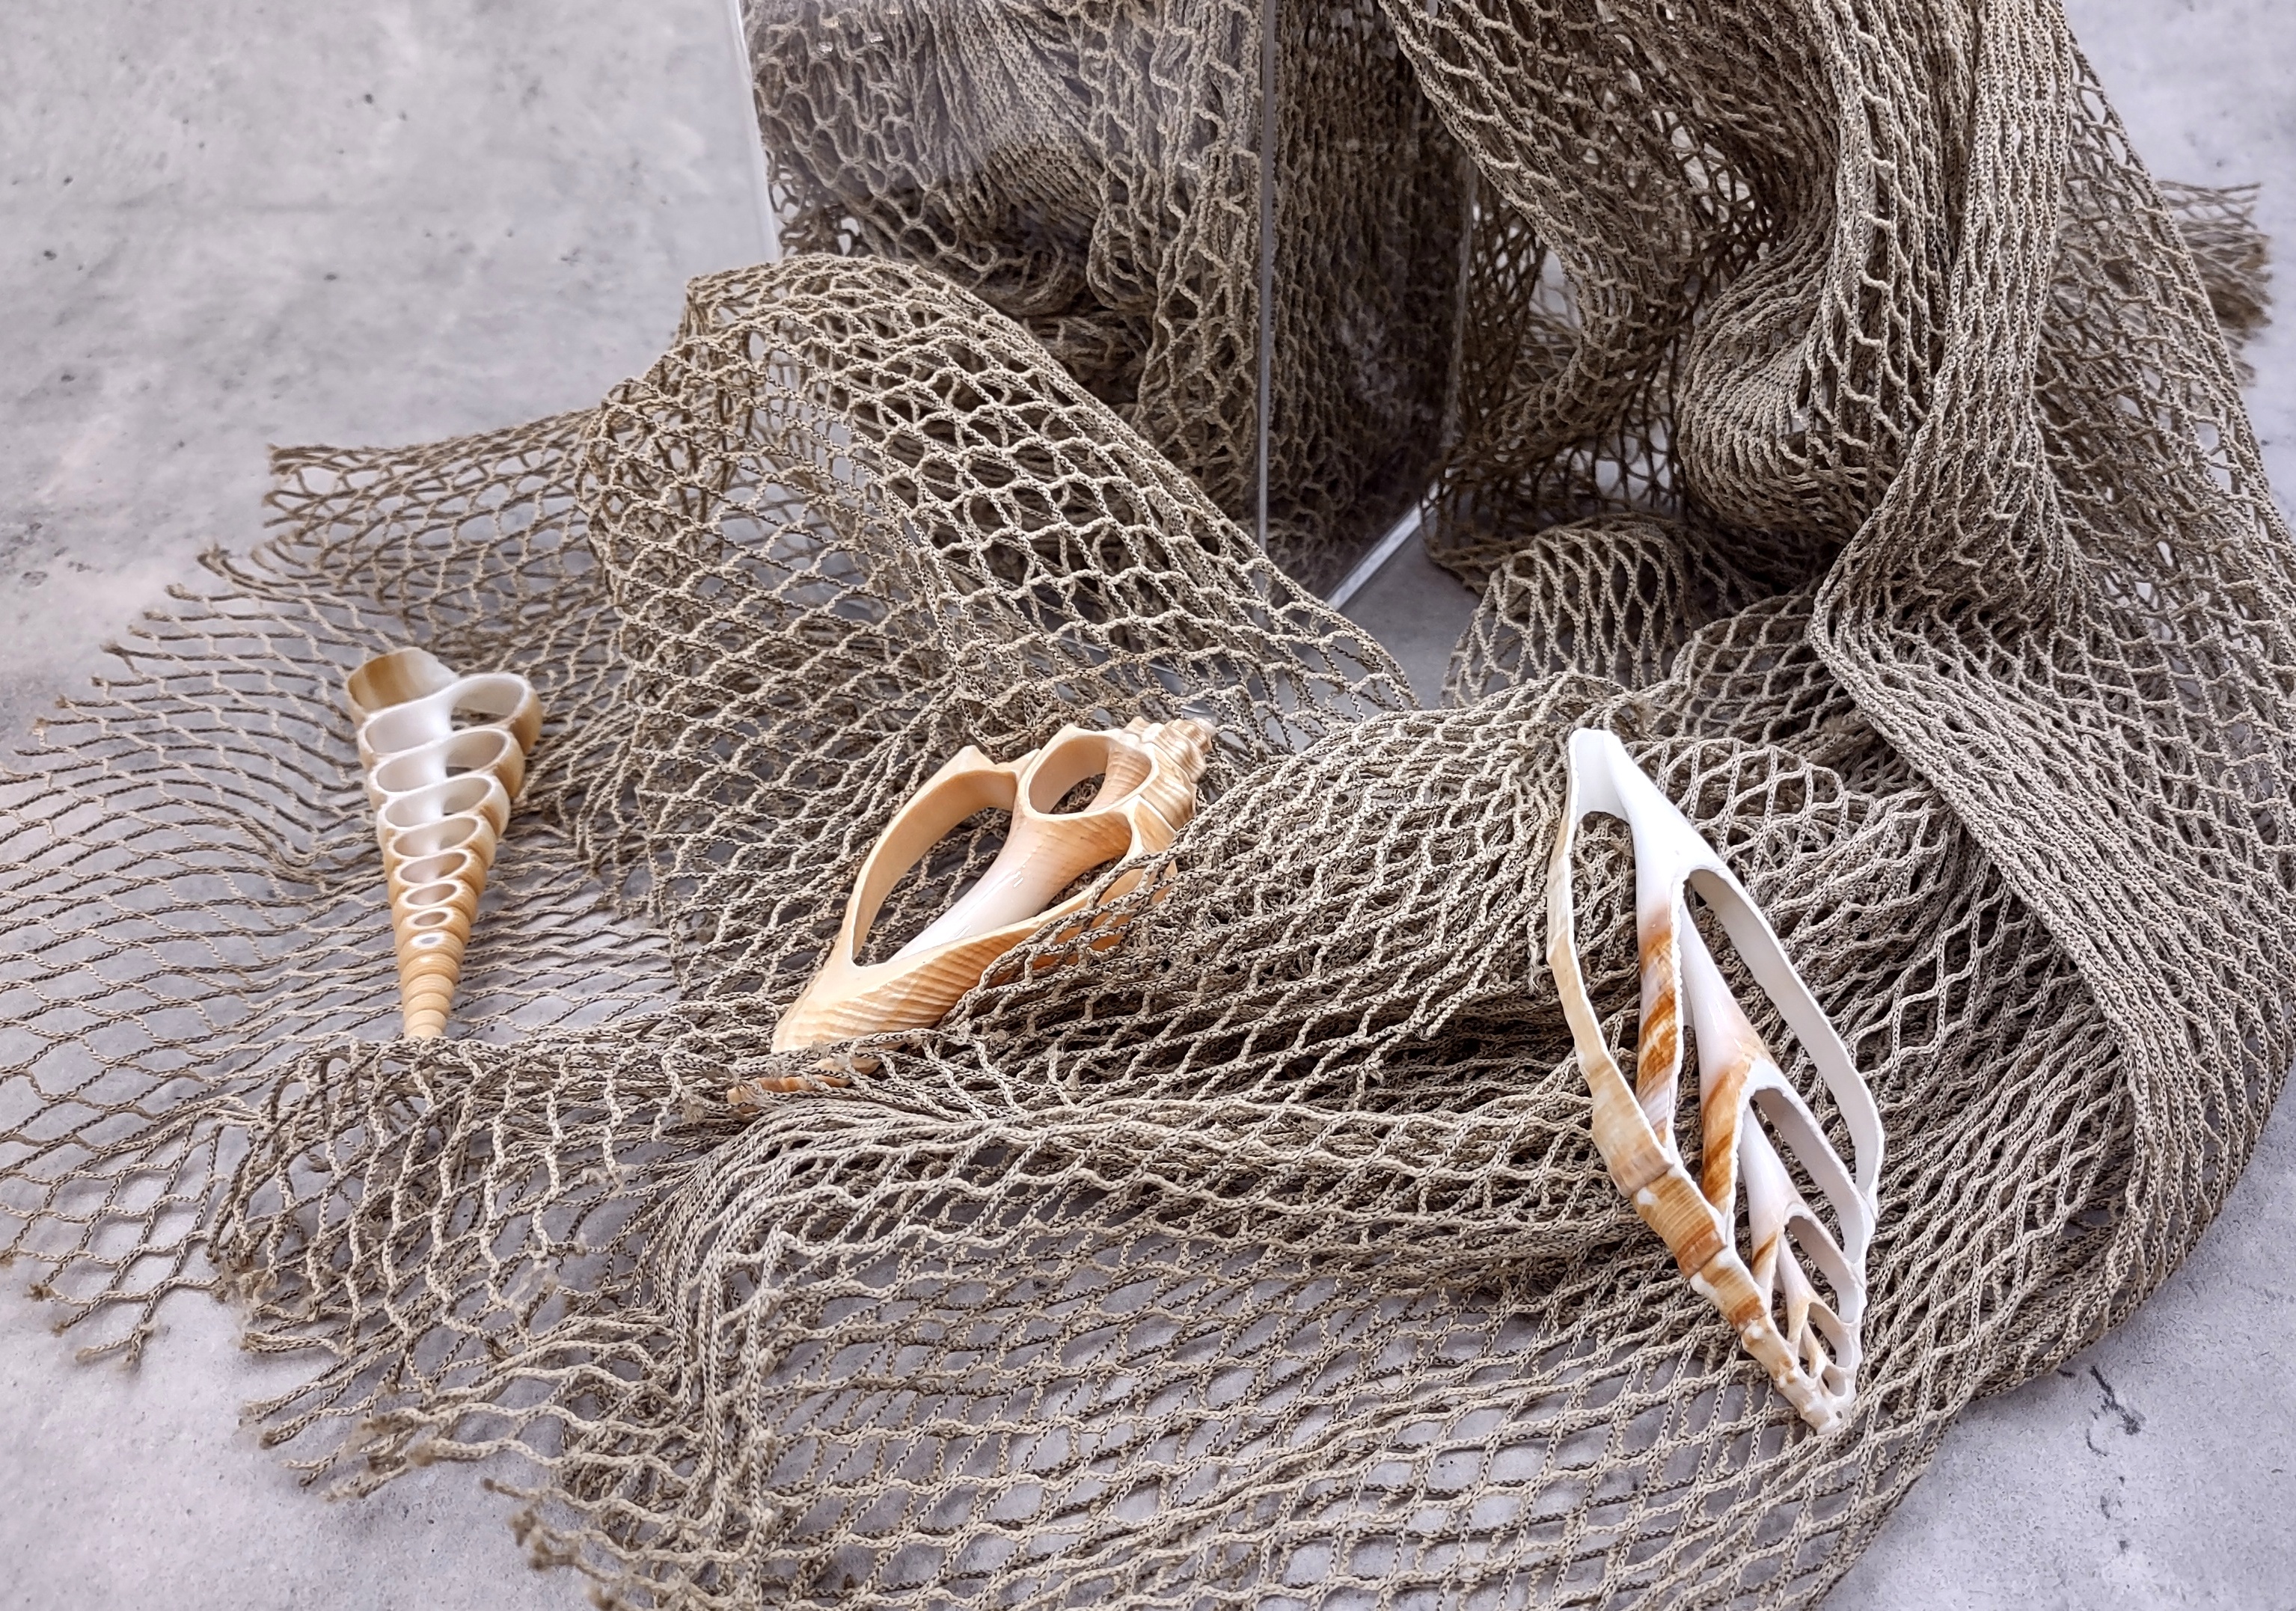 Decorative Fish Net Brown Olive Green Woven (approx. 4X9 feet